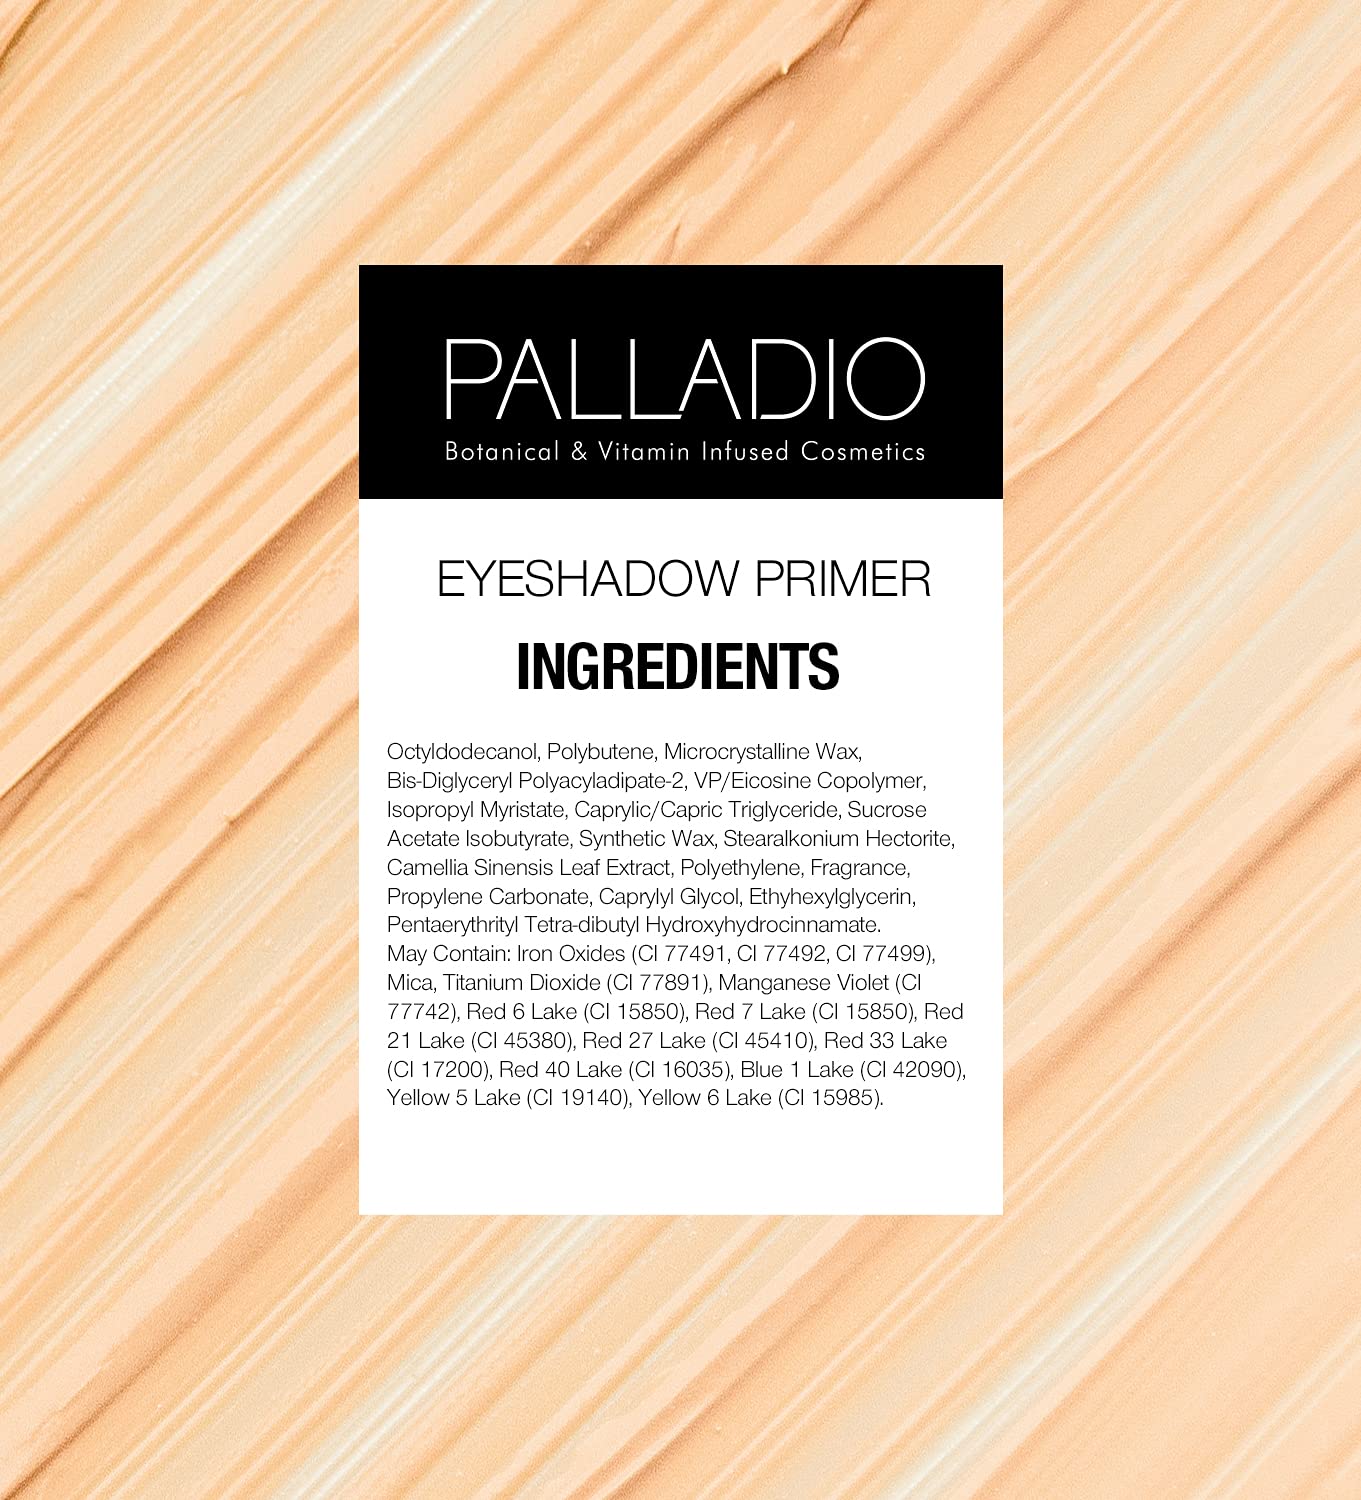 Palladio Eyeshadow Primer, Eliminates Creasing, Ensures Maximum Shadow Vibrancy All Day Long, Enhanced with 5 Different Herbal Extracts, Instantly Vanishing Sheer Finish, Easy Application with Wand